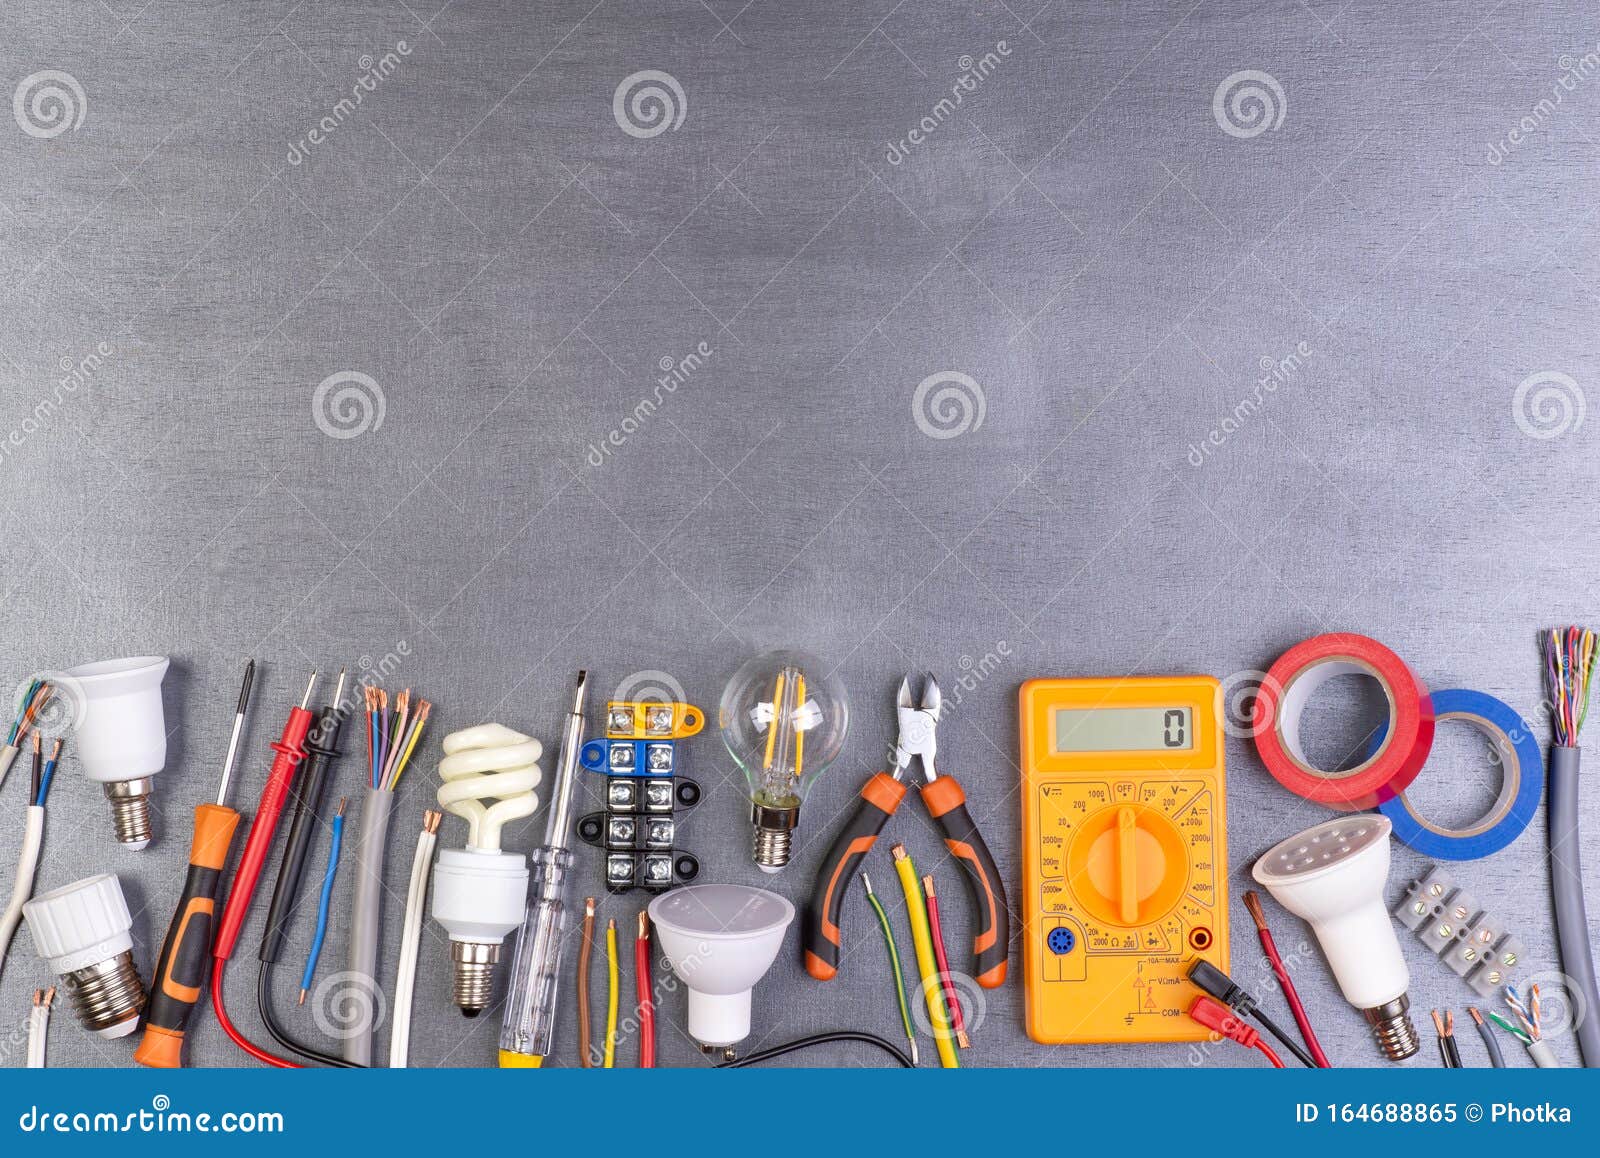 electrician equipment on metalic background, top view